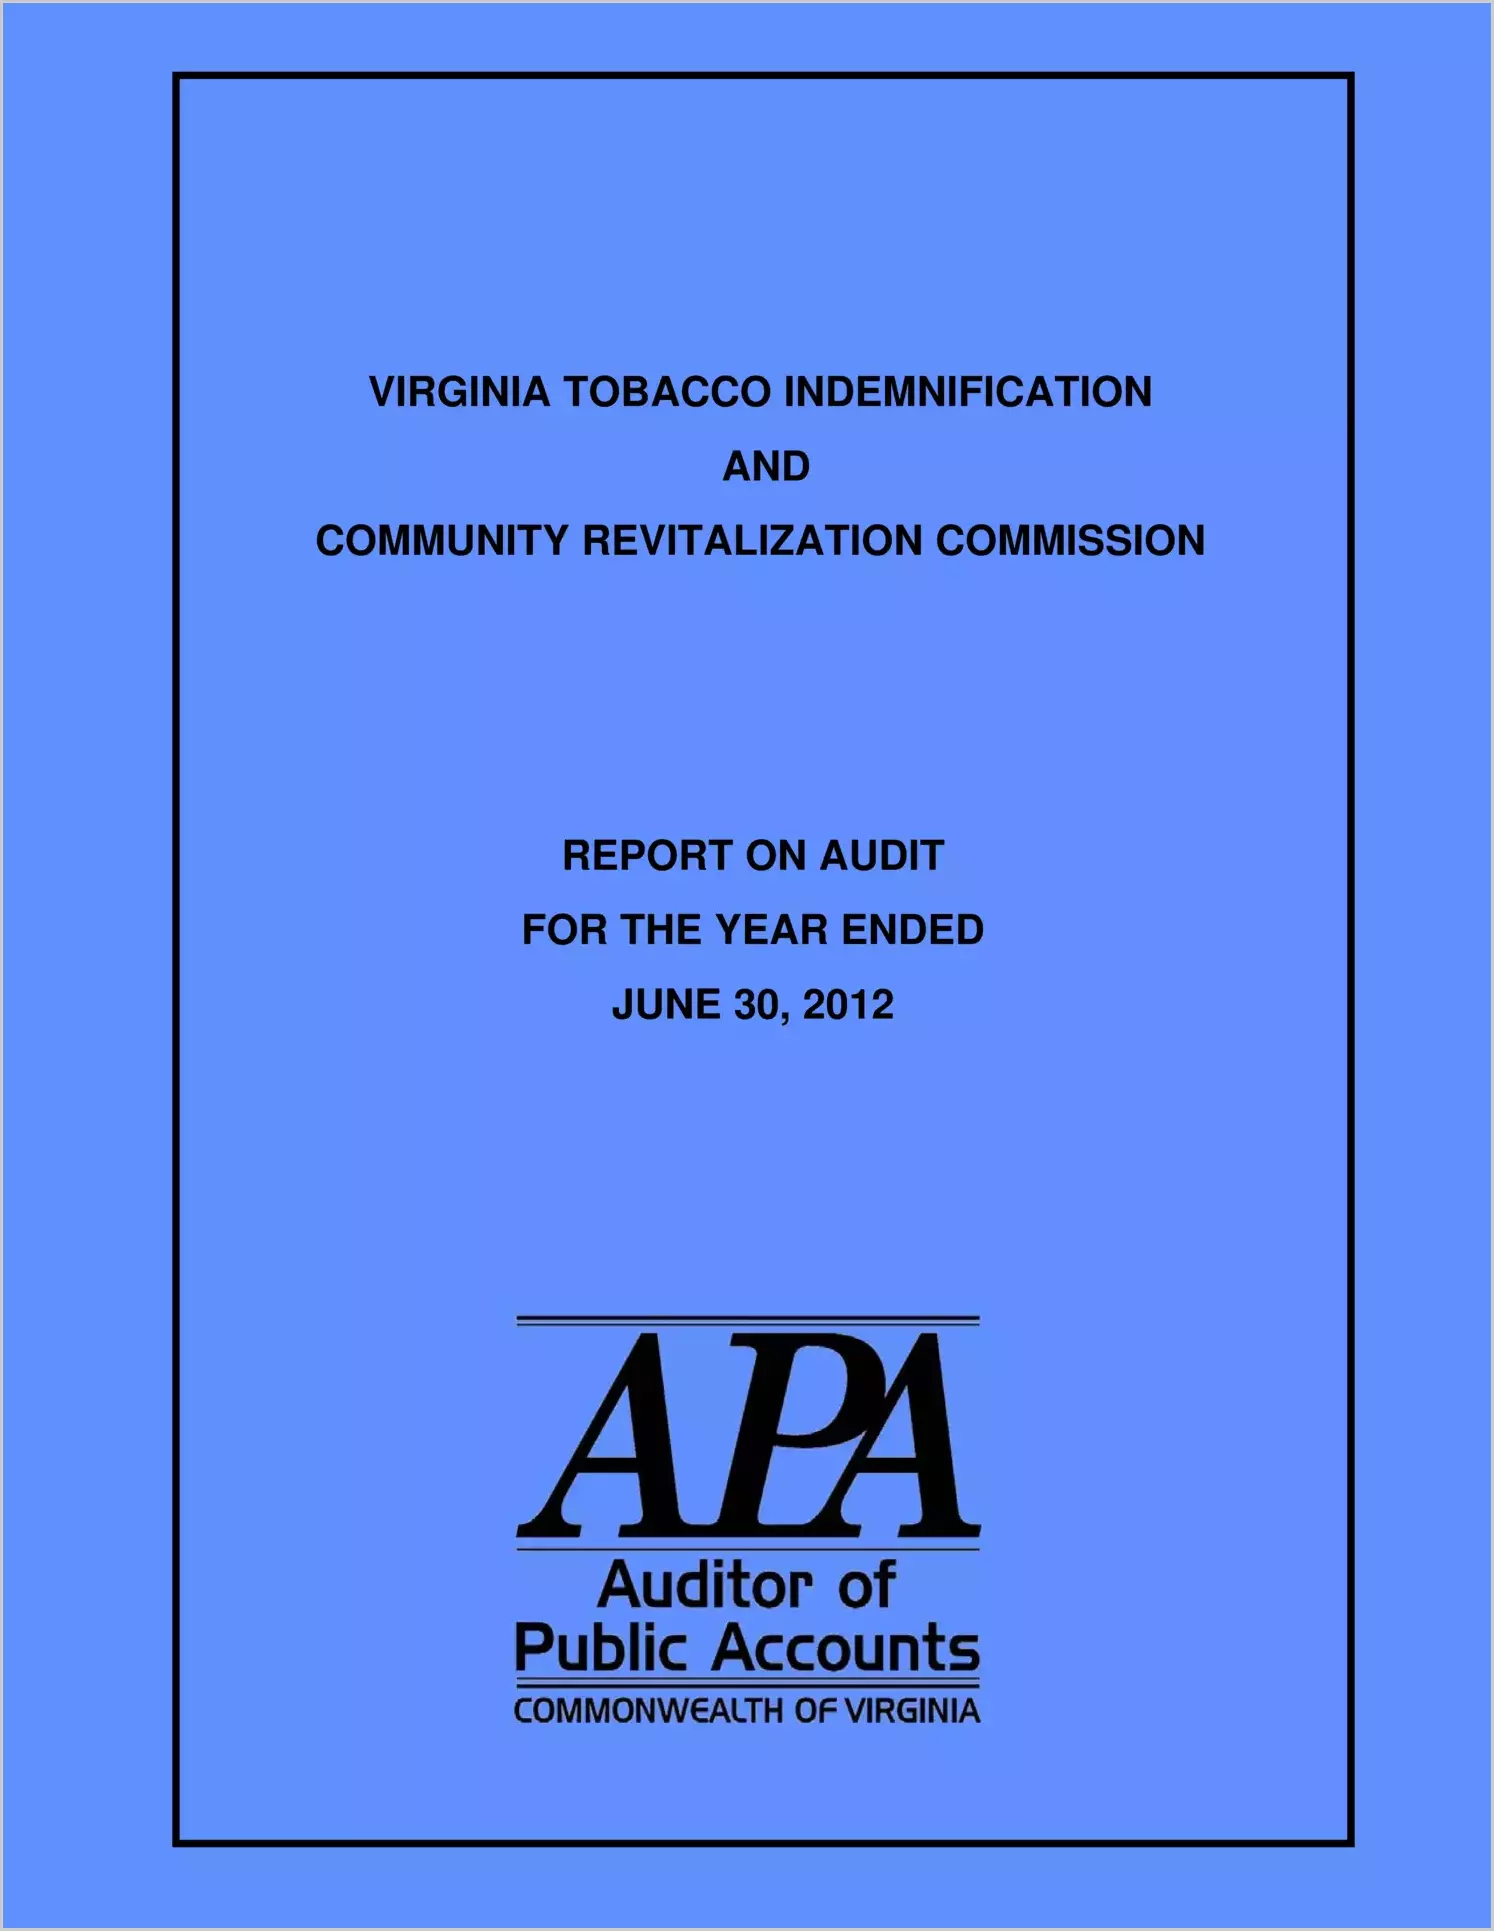 Tobacco Indemnification and Community Revitalization Commission for the year ended June 30, 2012